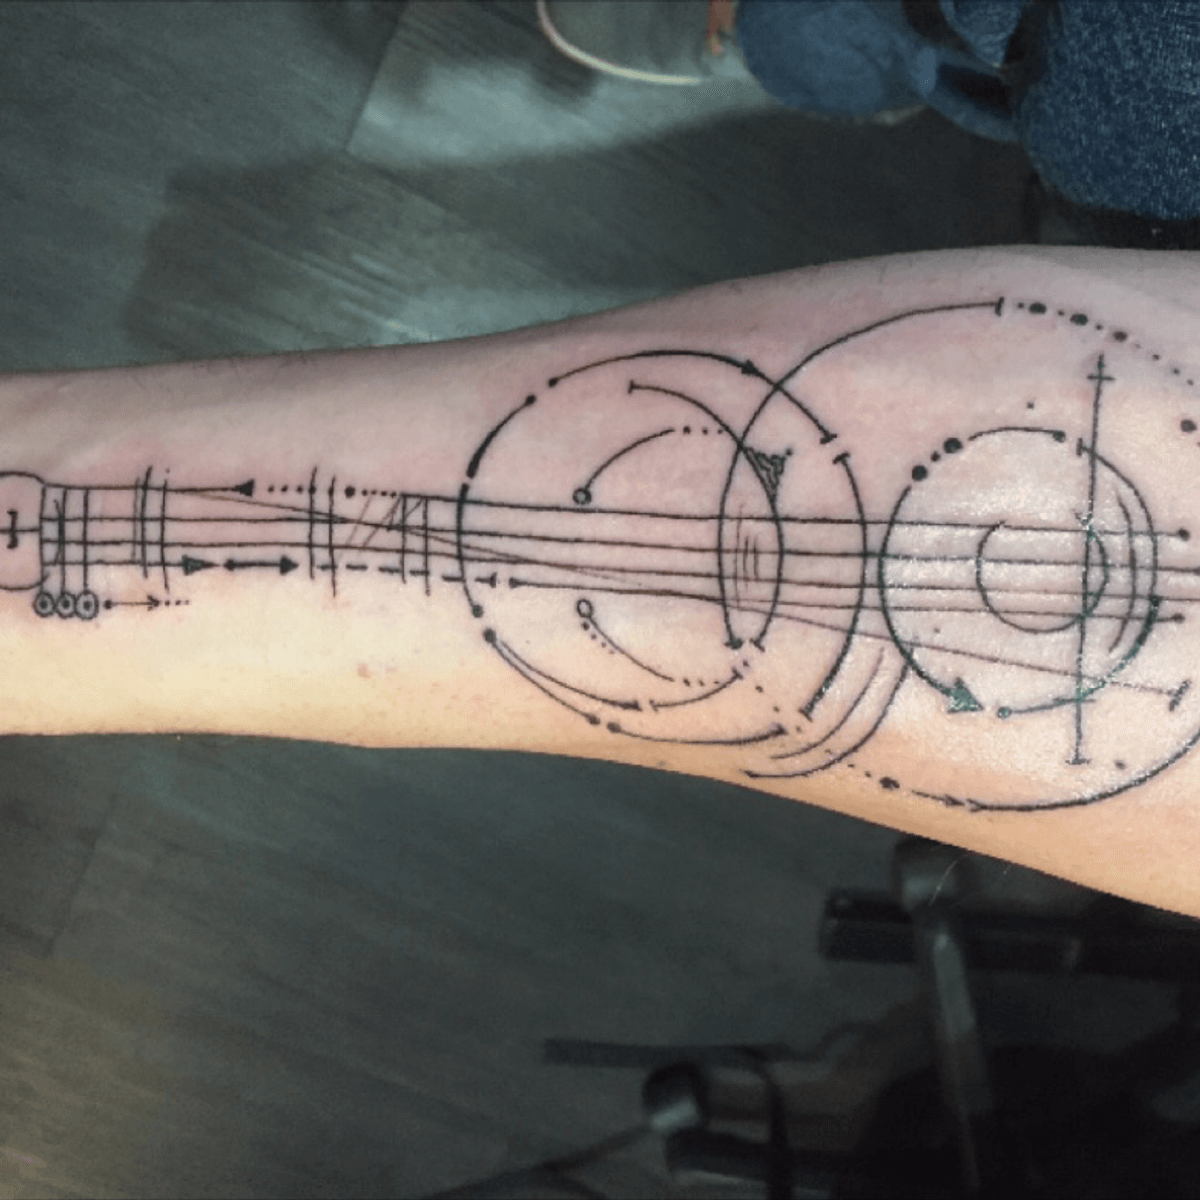 Tattoo uploaded by Andy • #abstract #guitar by Paddy • Tattoodo